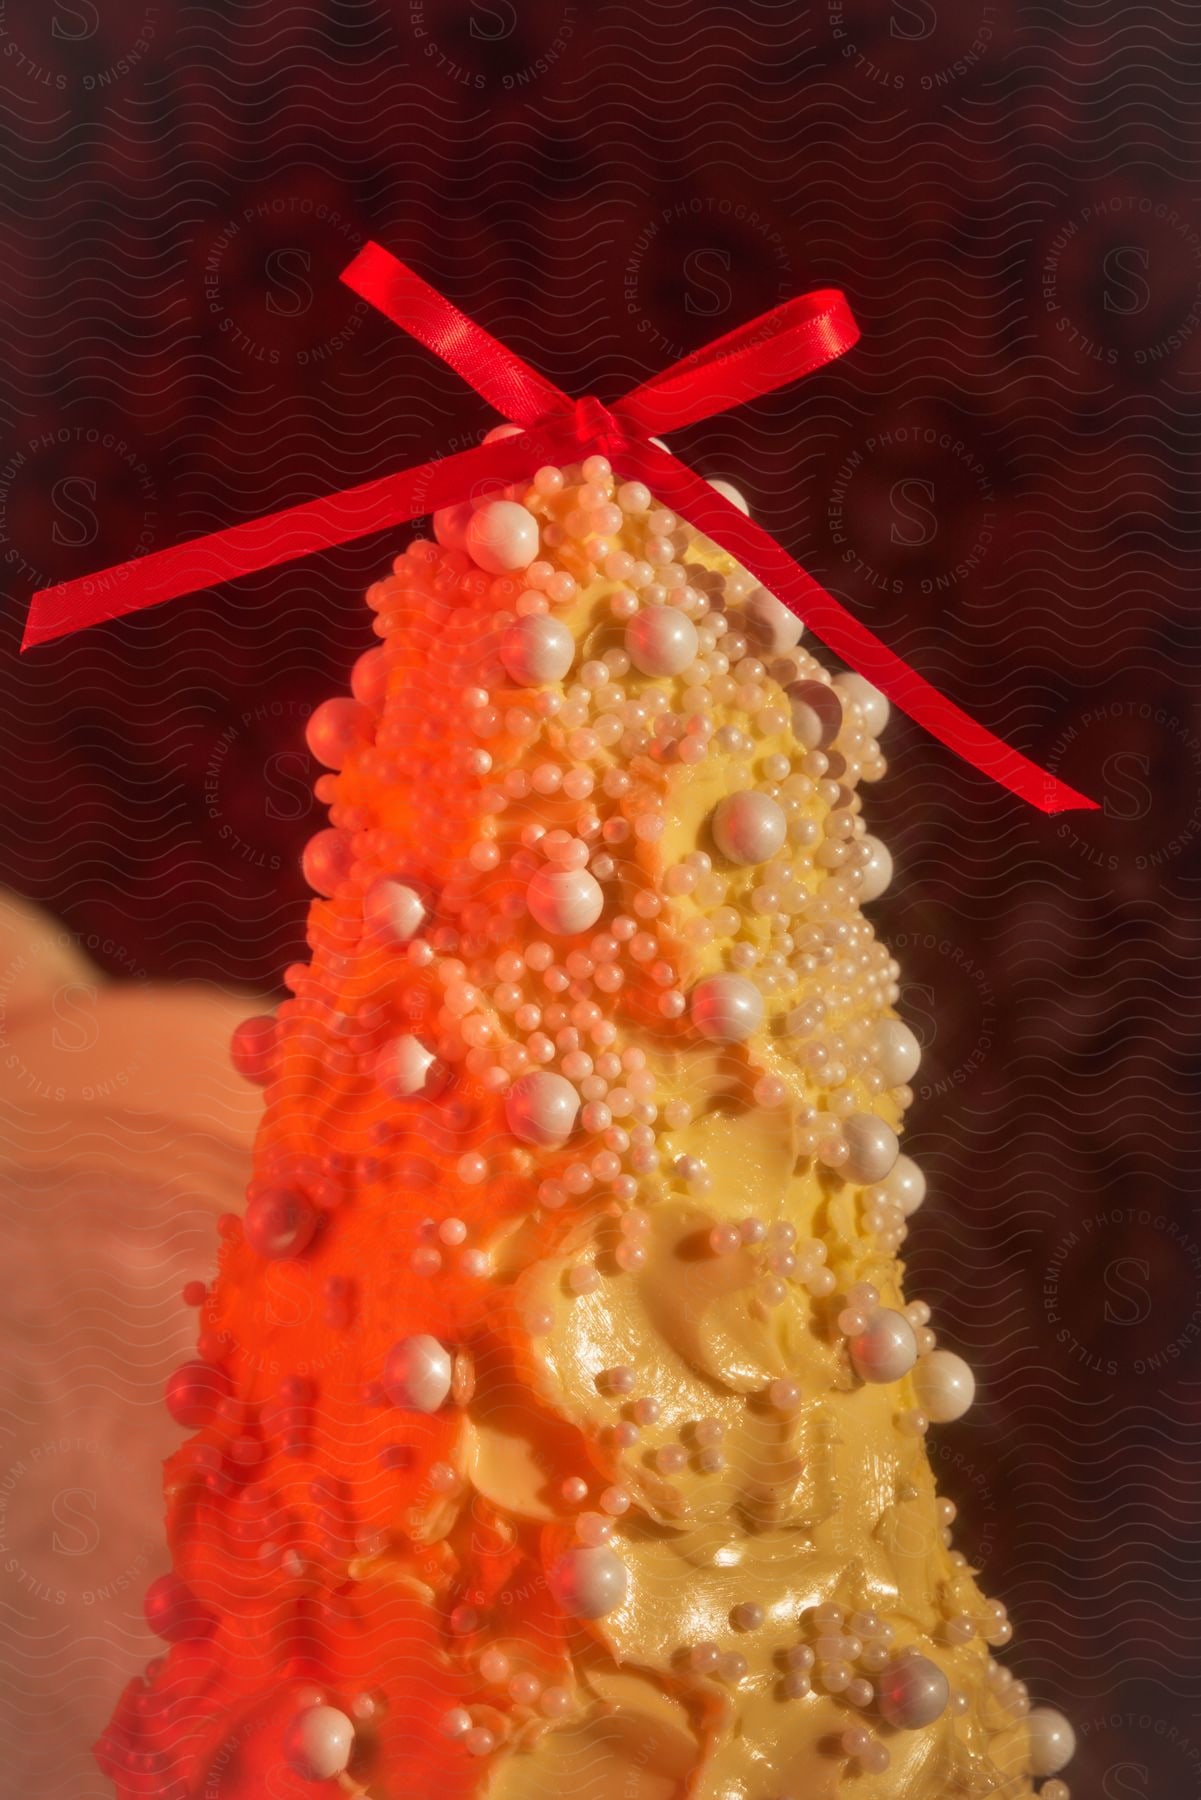 Stock photo of vertical pastry with a red bow, orange frosting and candy pearls